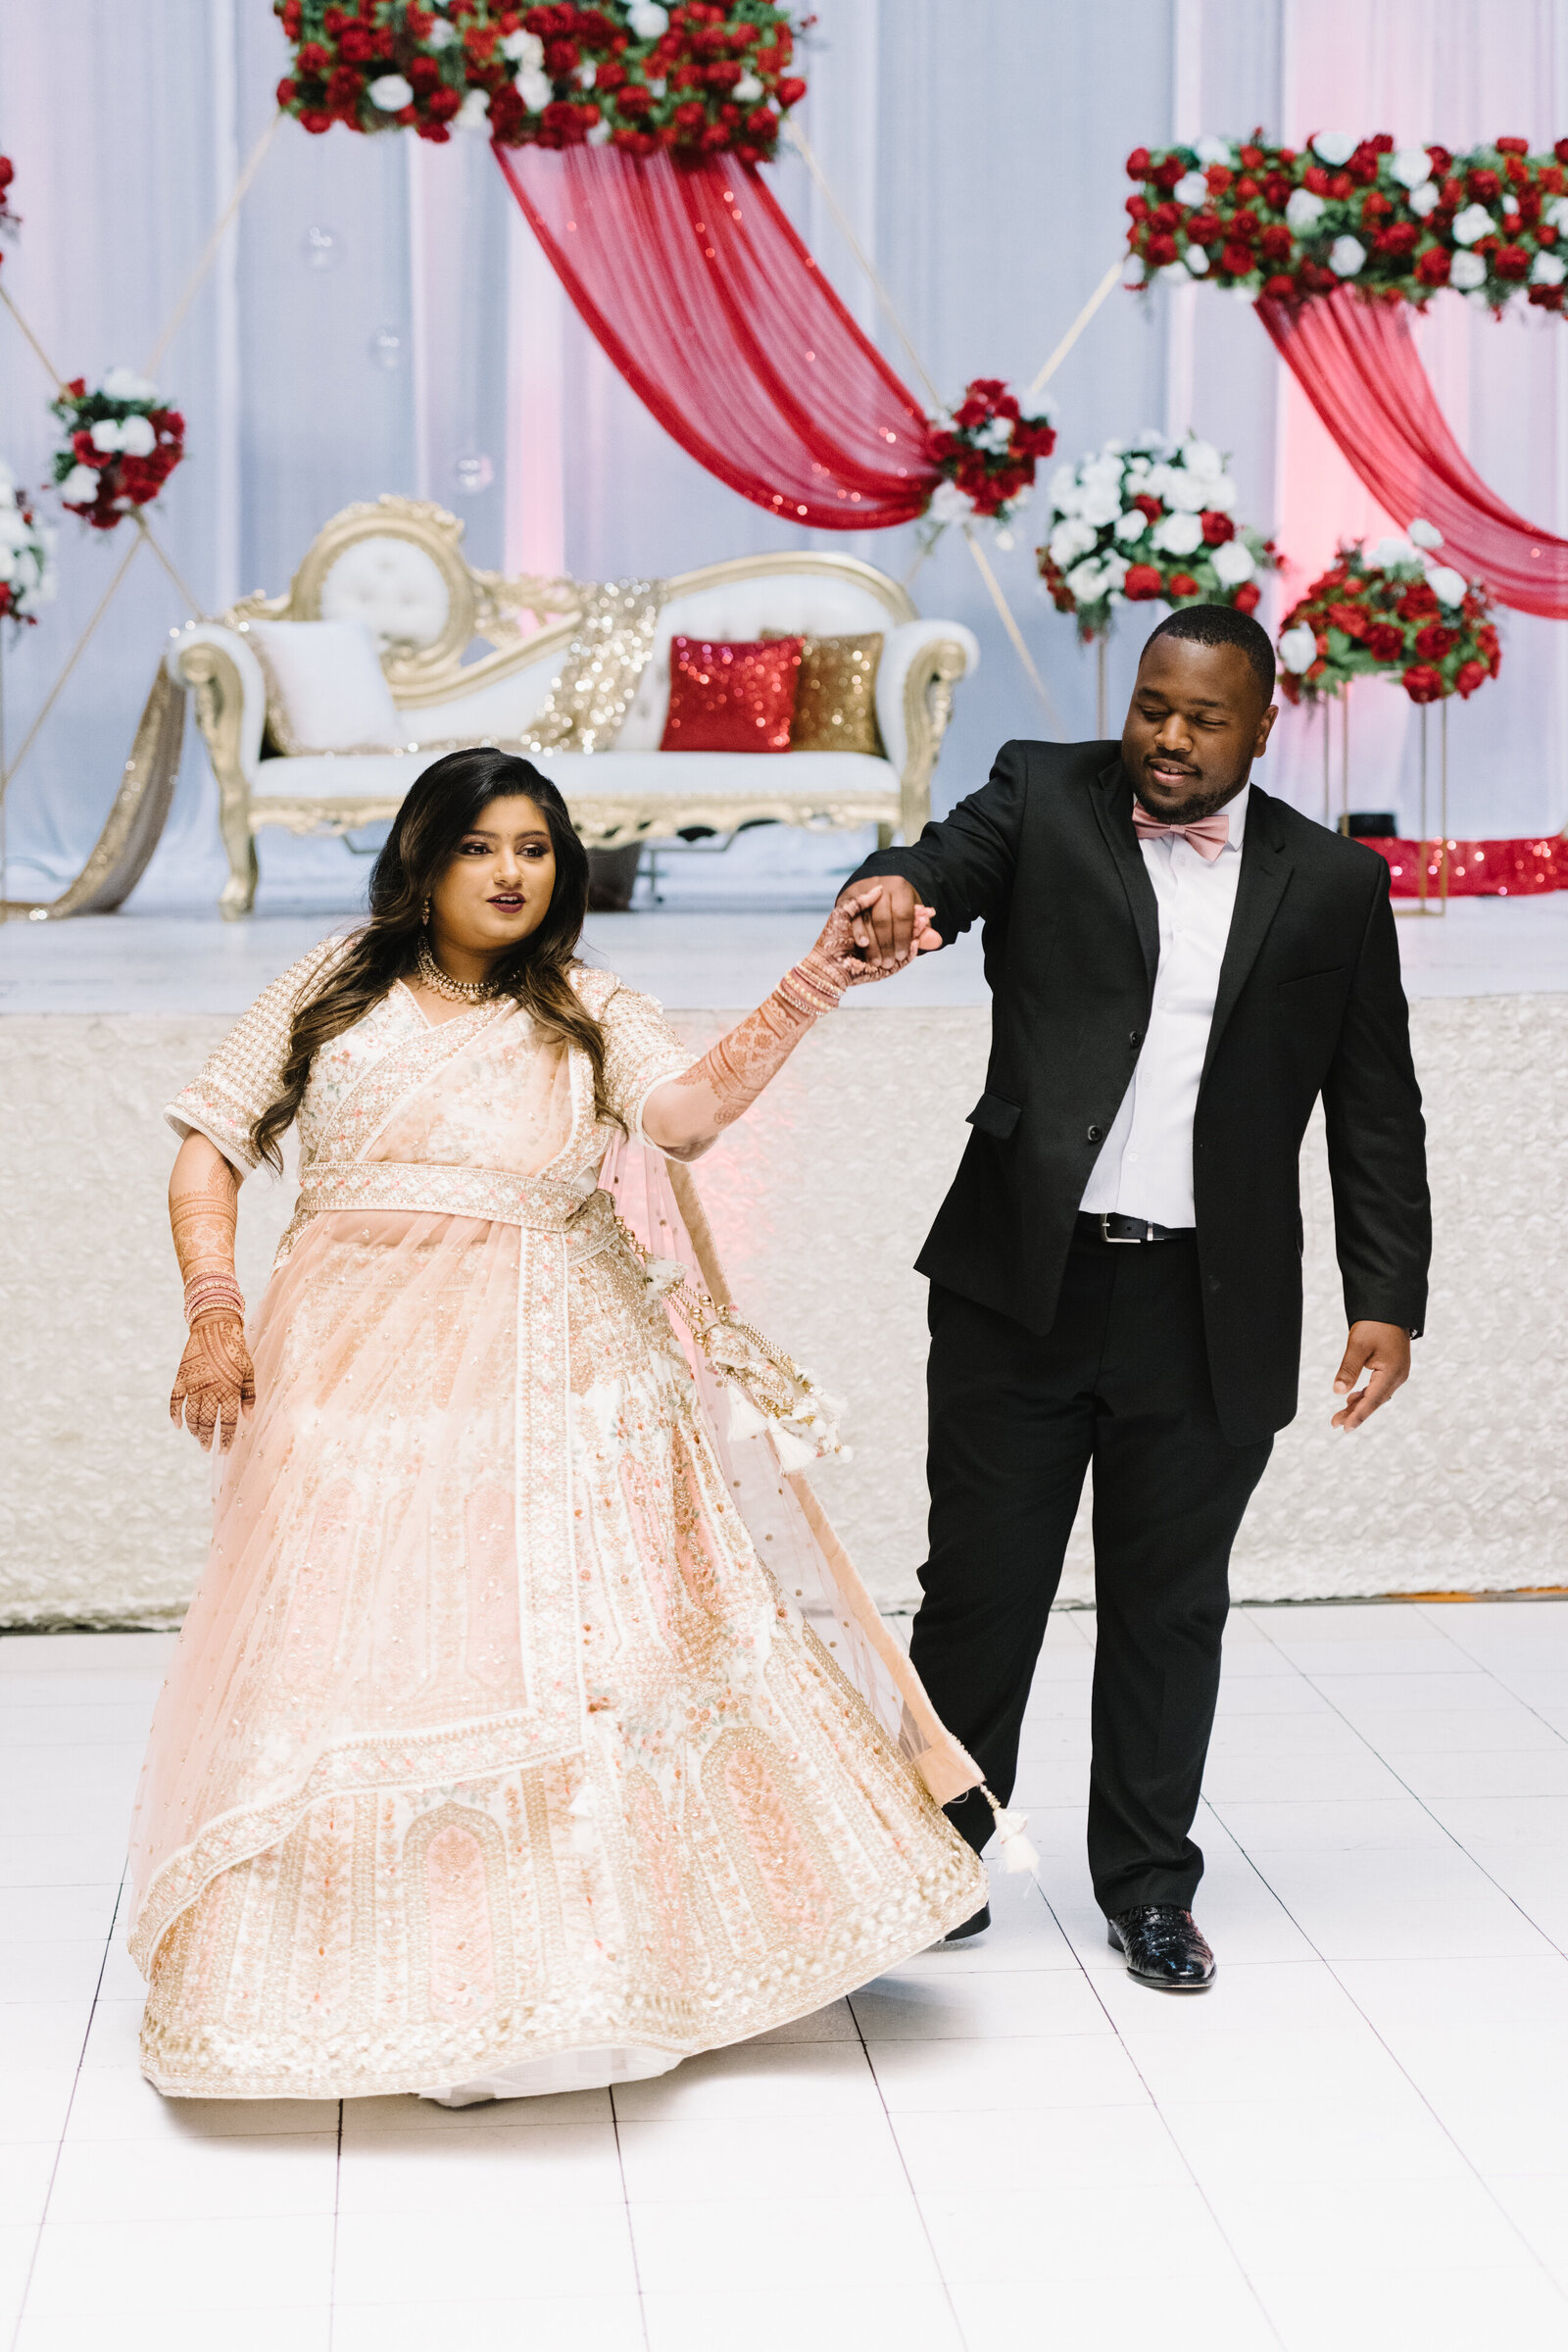 Bride and Groom First Dance at Indian Wedding Reception